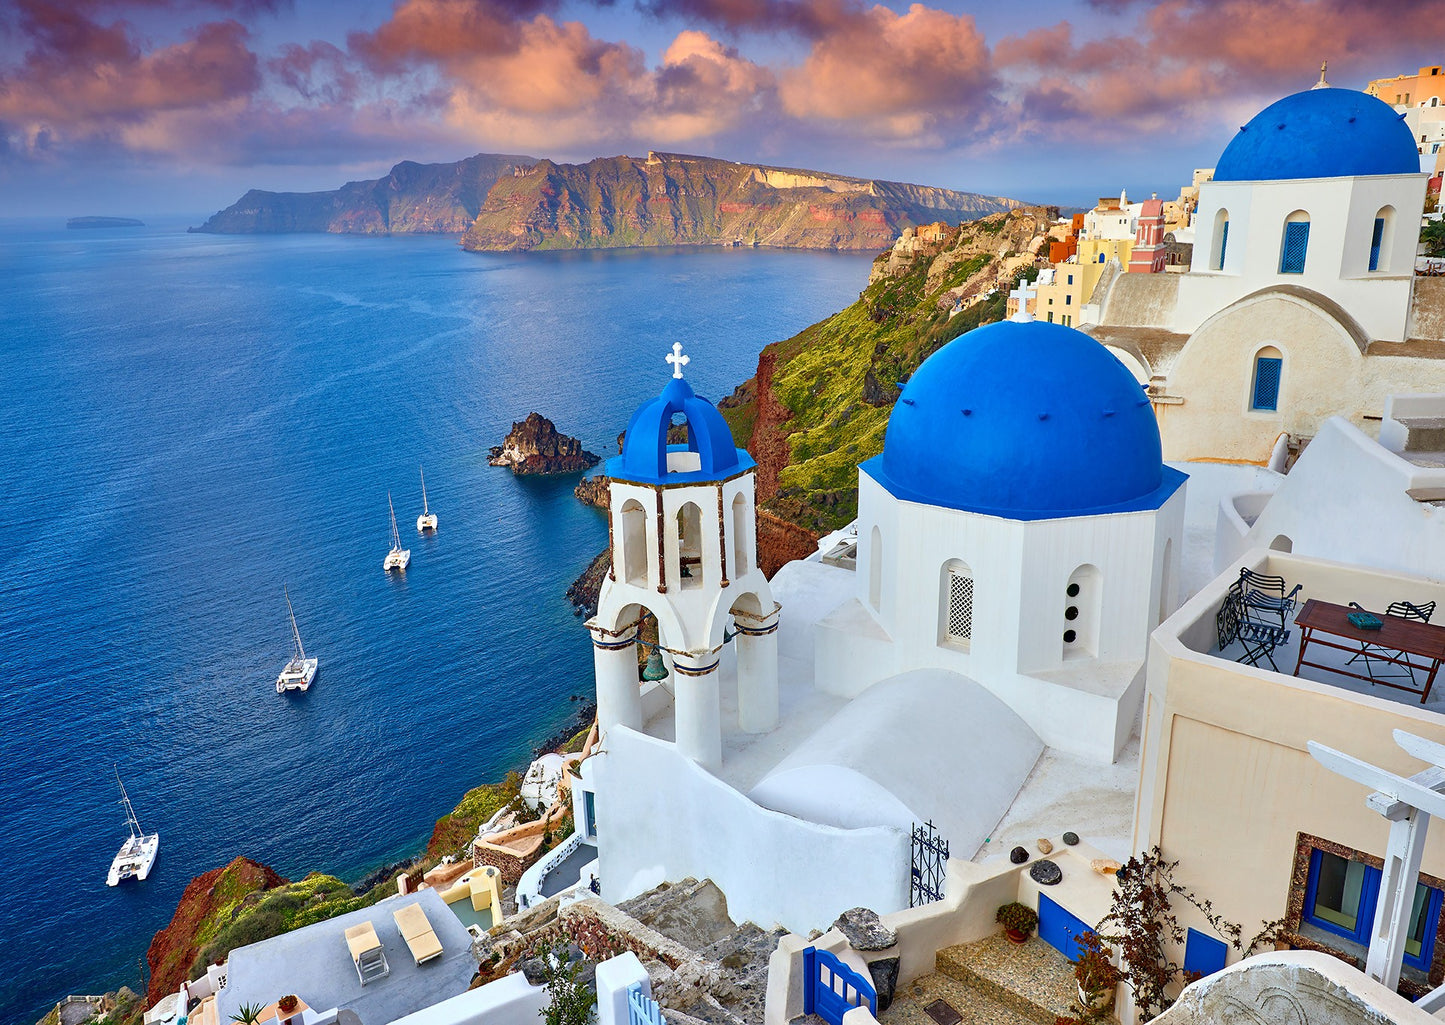 1000 Pieces Jigsaw Puzzle - Santorini View with Boats (1086)